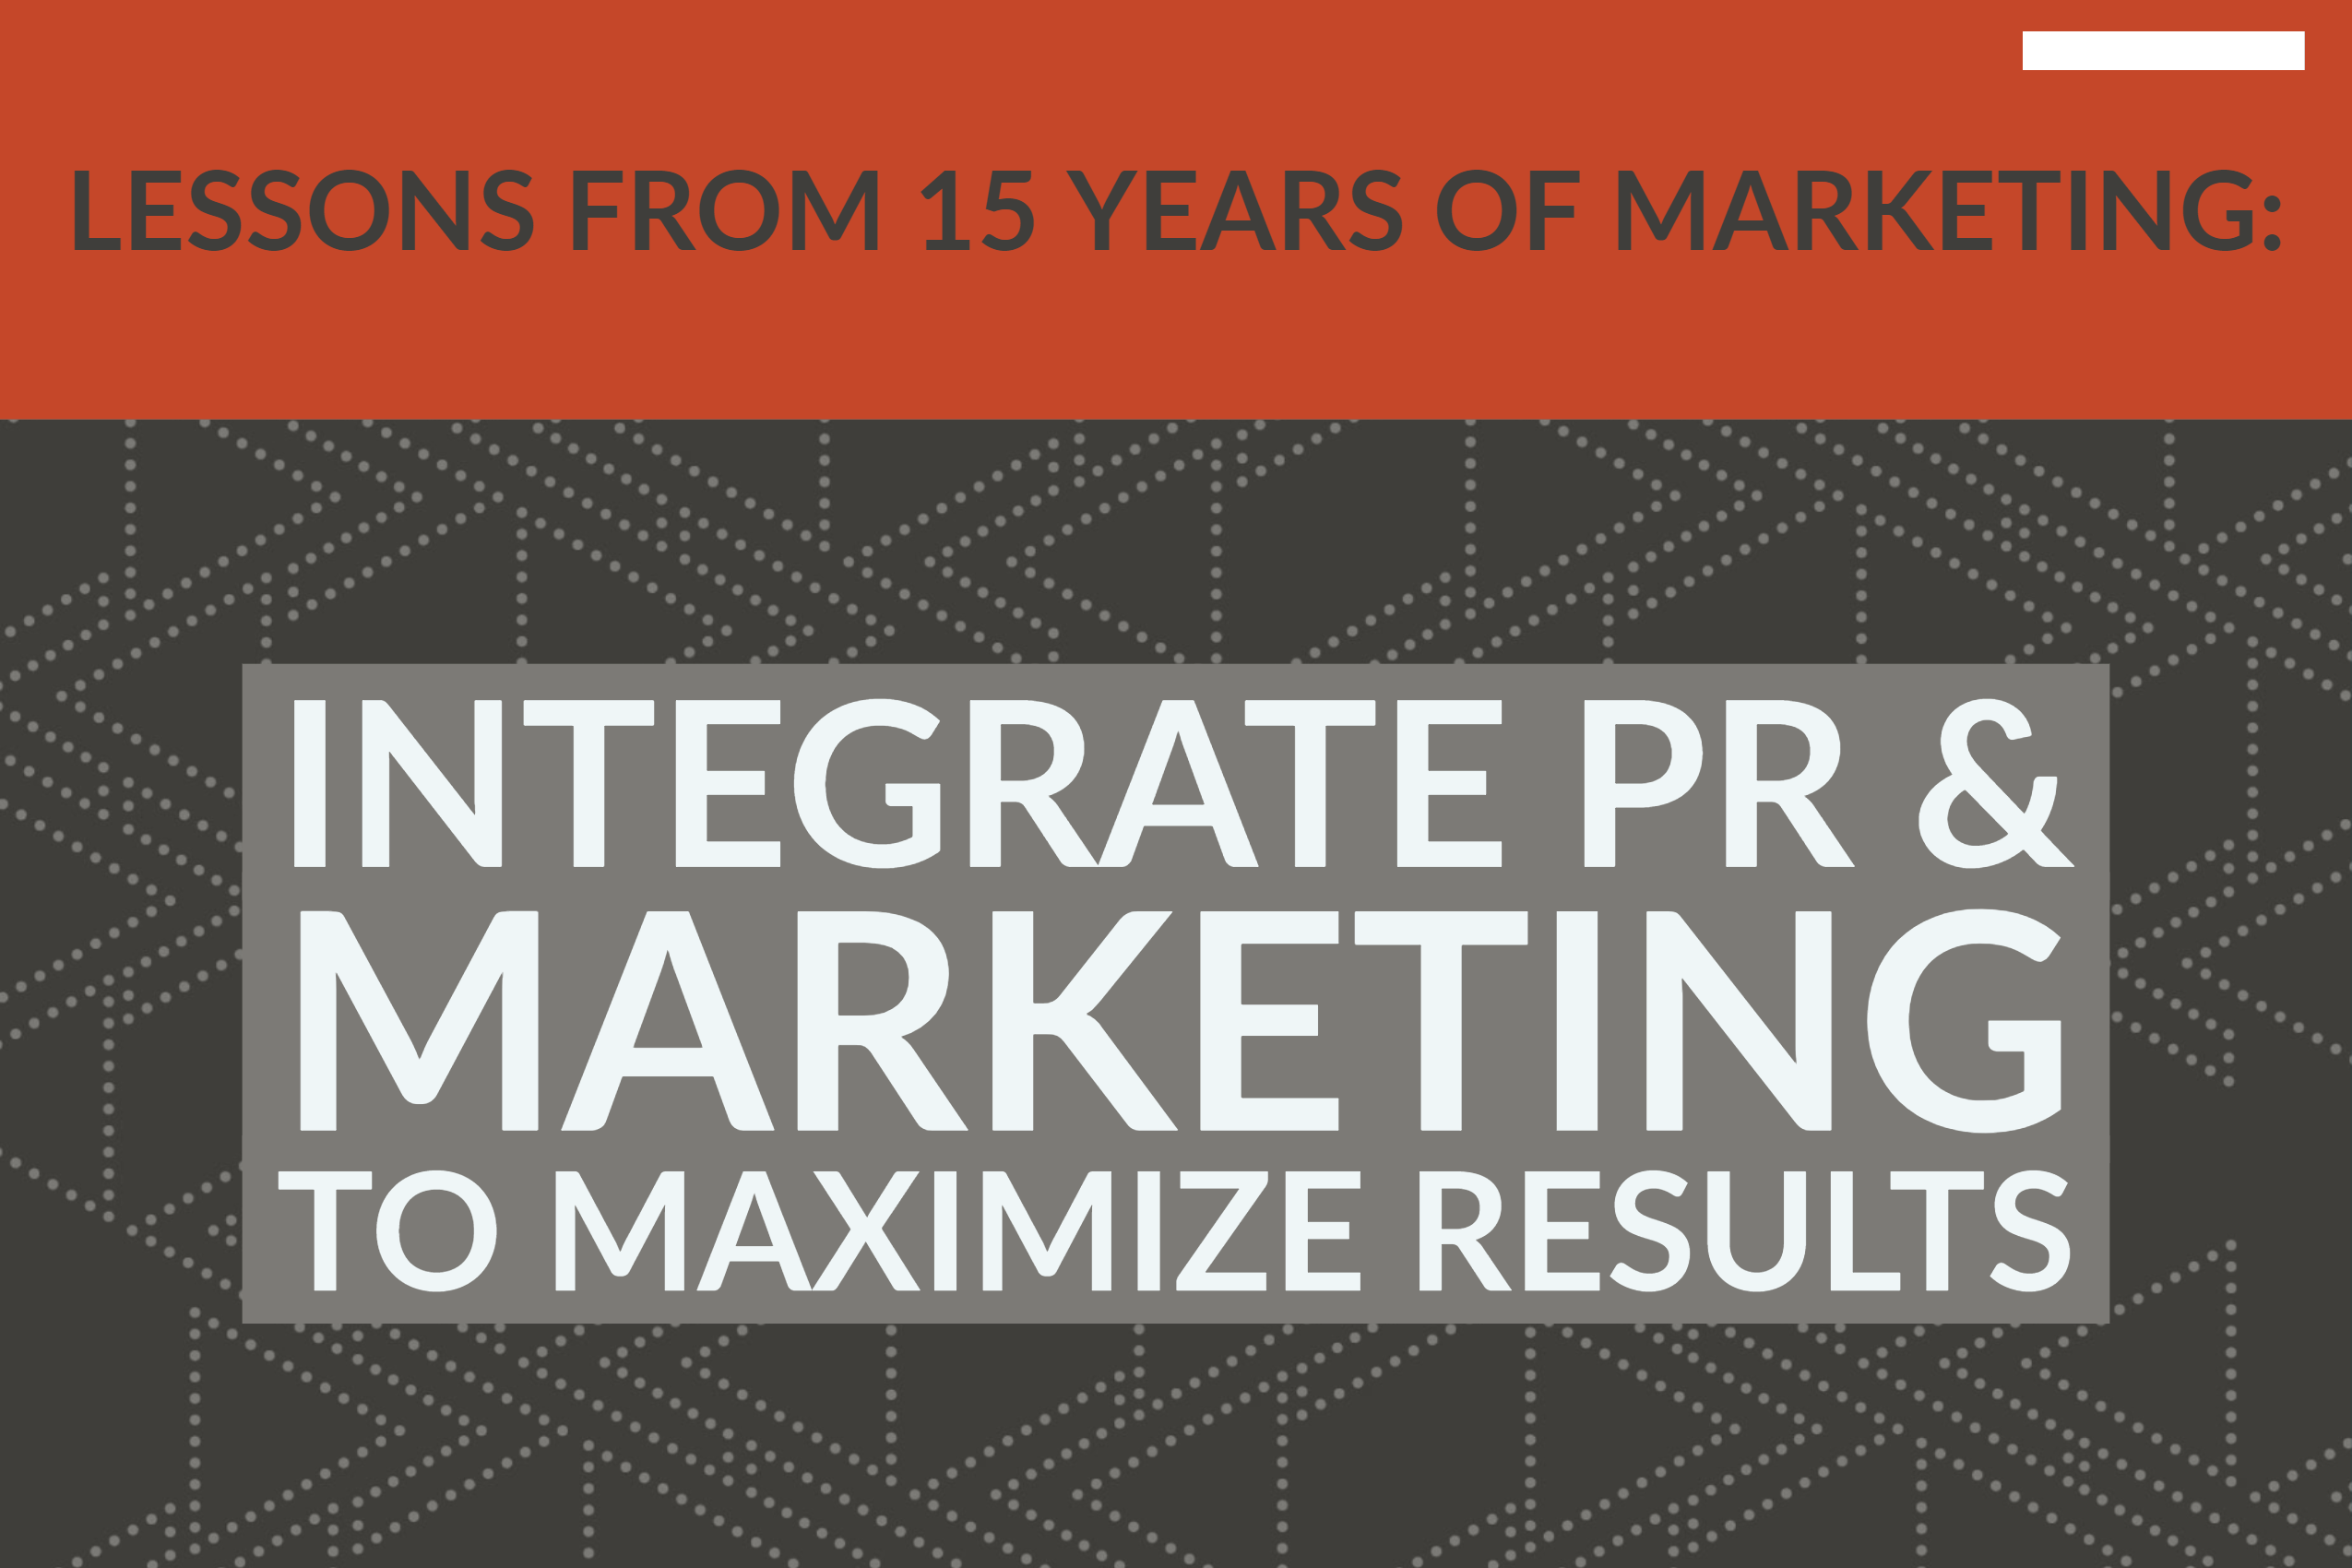 Lessons From 15 Years: Integrate PR & Marketing To Maximize Results